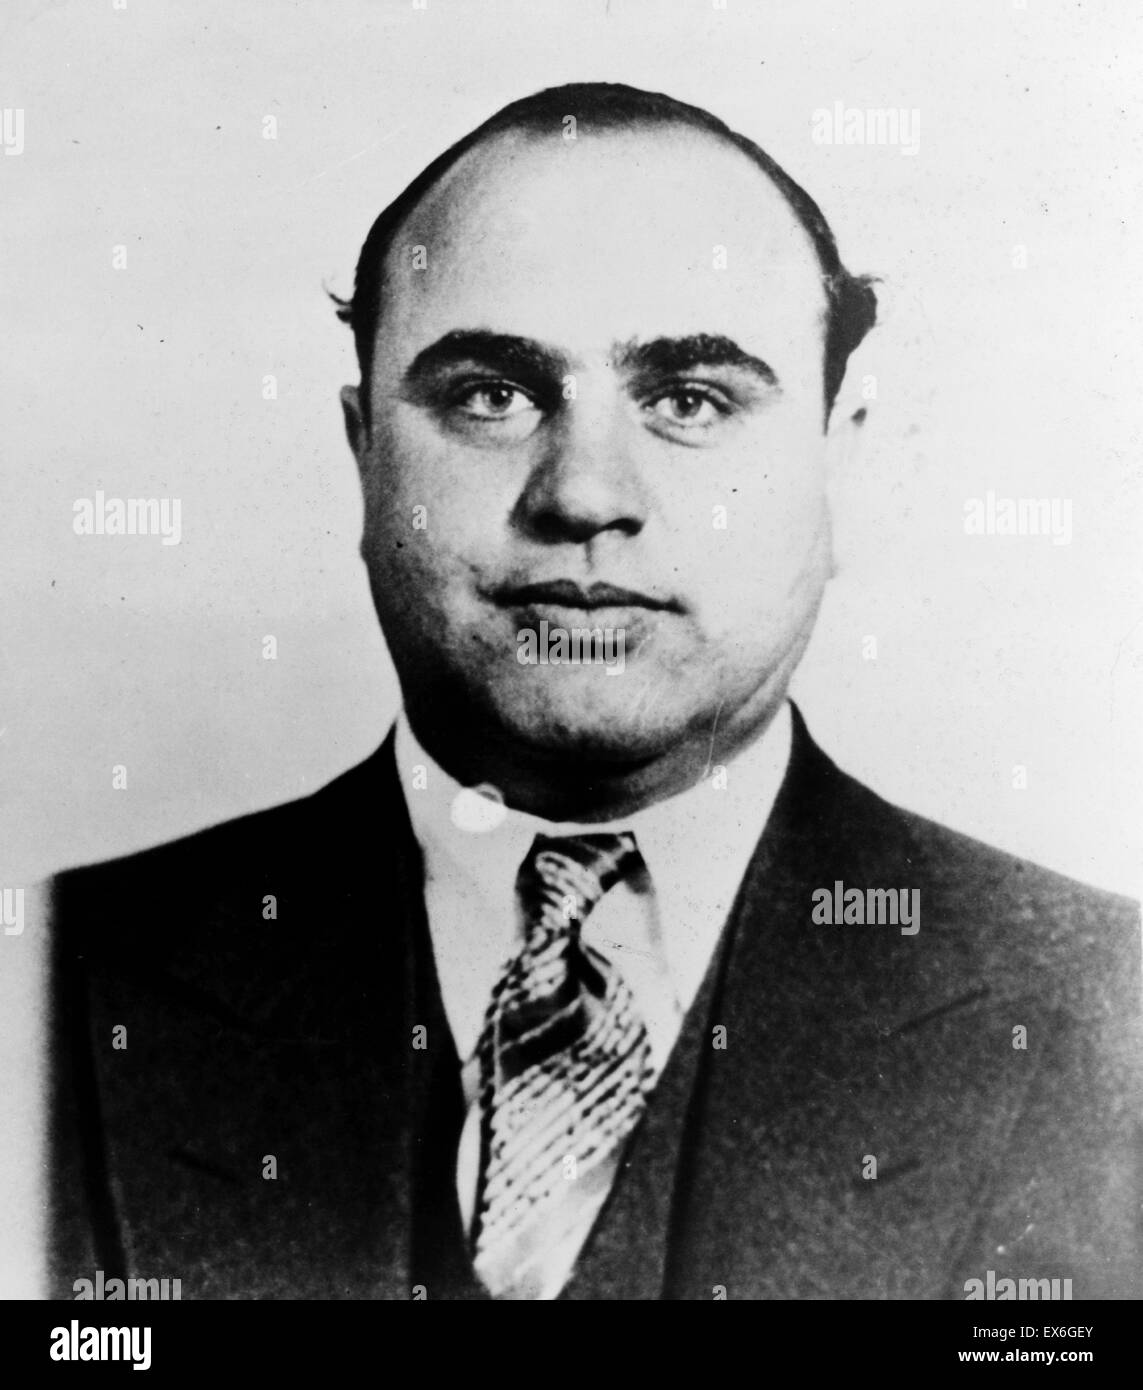 Photograph of Alphonse Gabriel 'Al' Capone (1899-1947). Infamous American gangster who attained fame during the Prohibition era in America. Dated 1945 Stock Photo